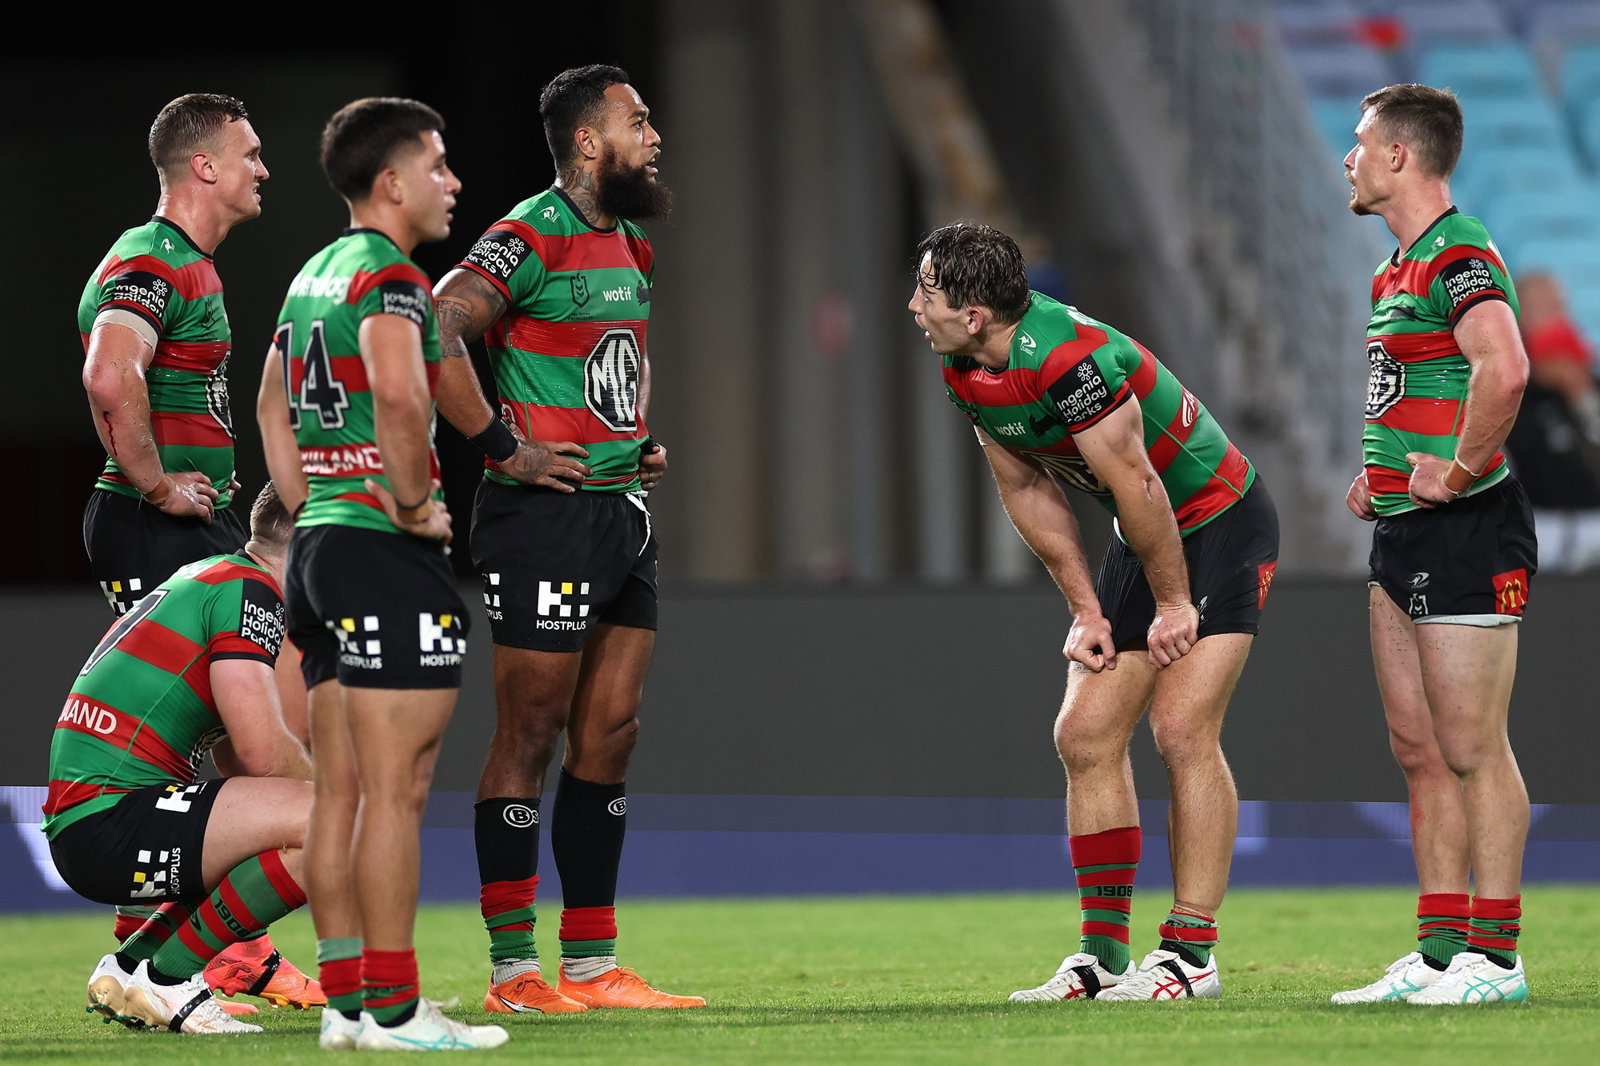 South Sydney Rabbitohs stand on the field during an NRL game.